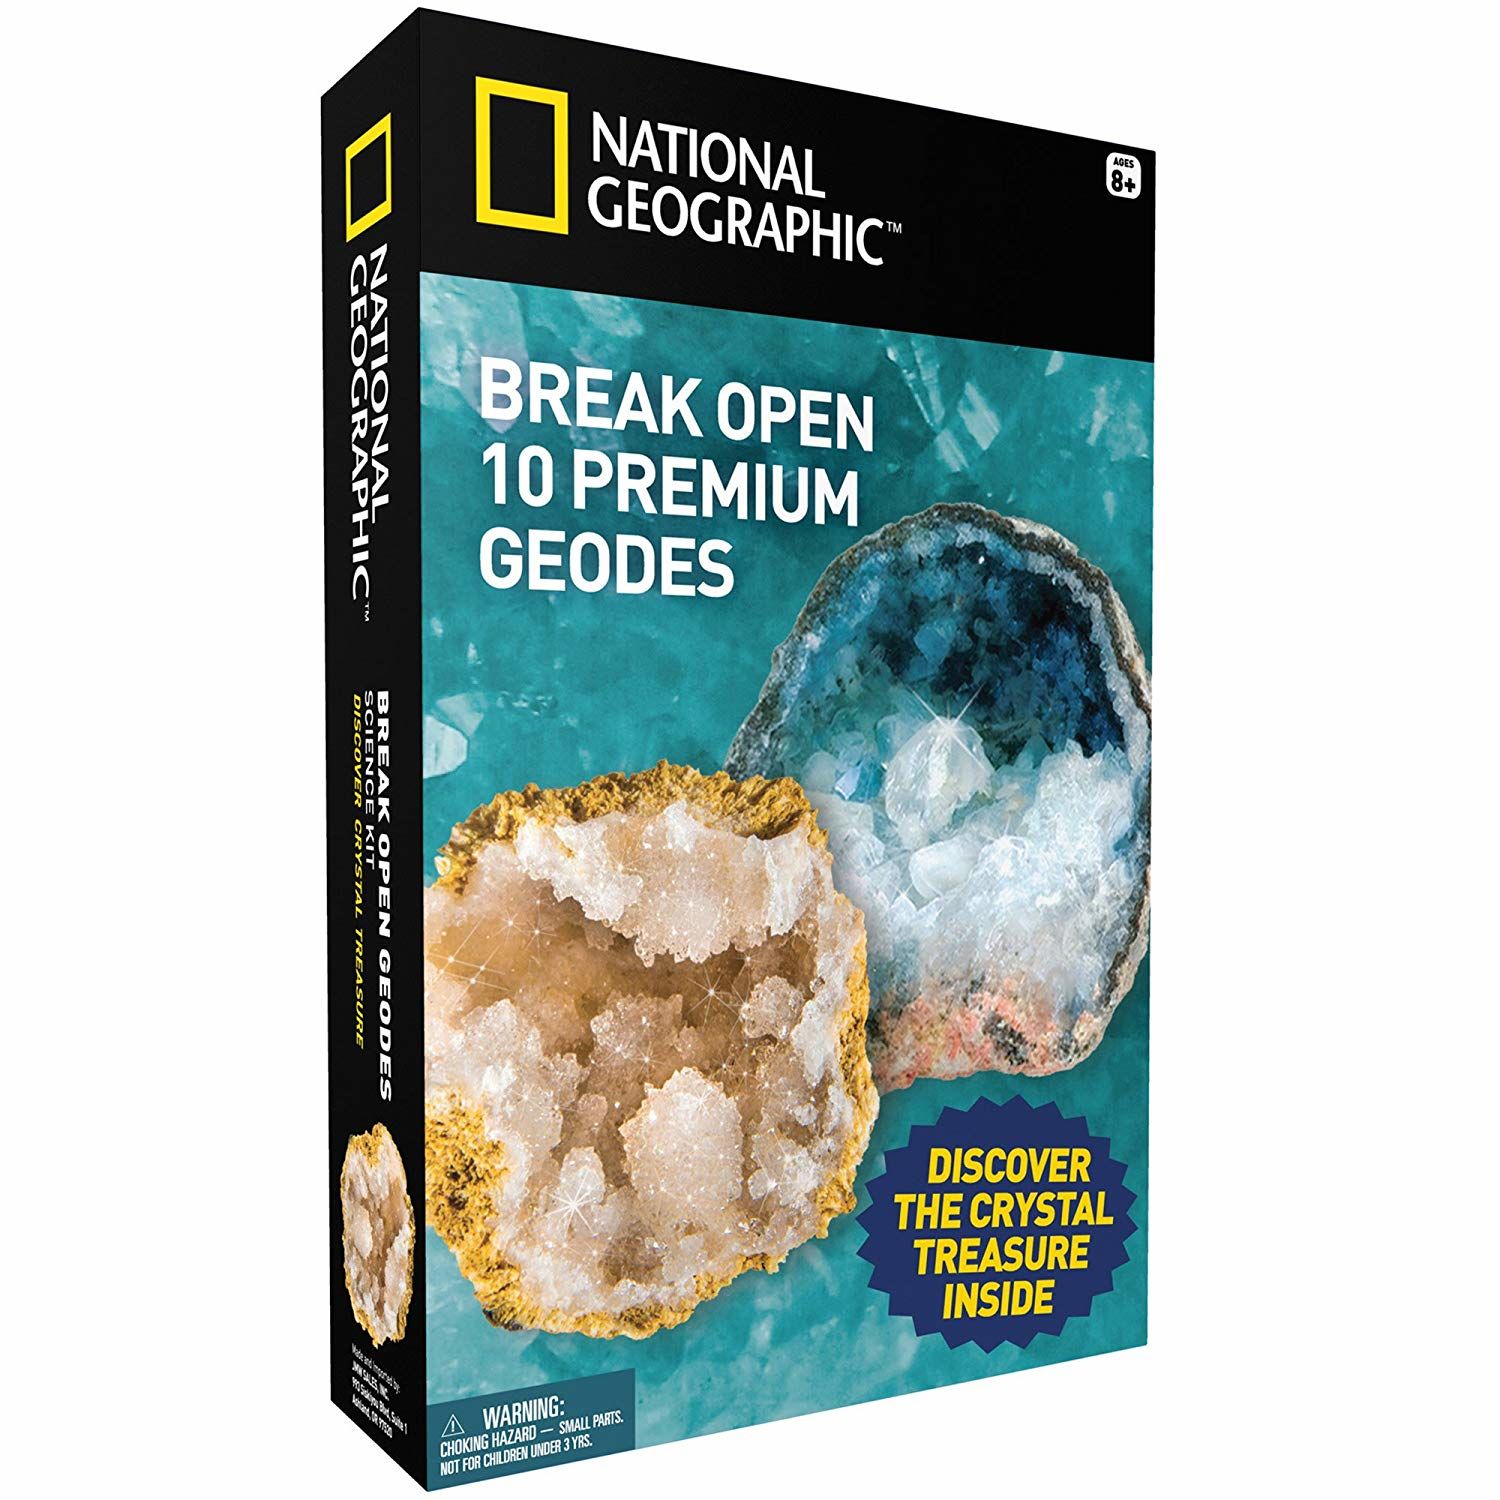 National Geographic Break Open 4 geodes Science Kit